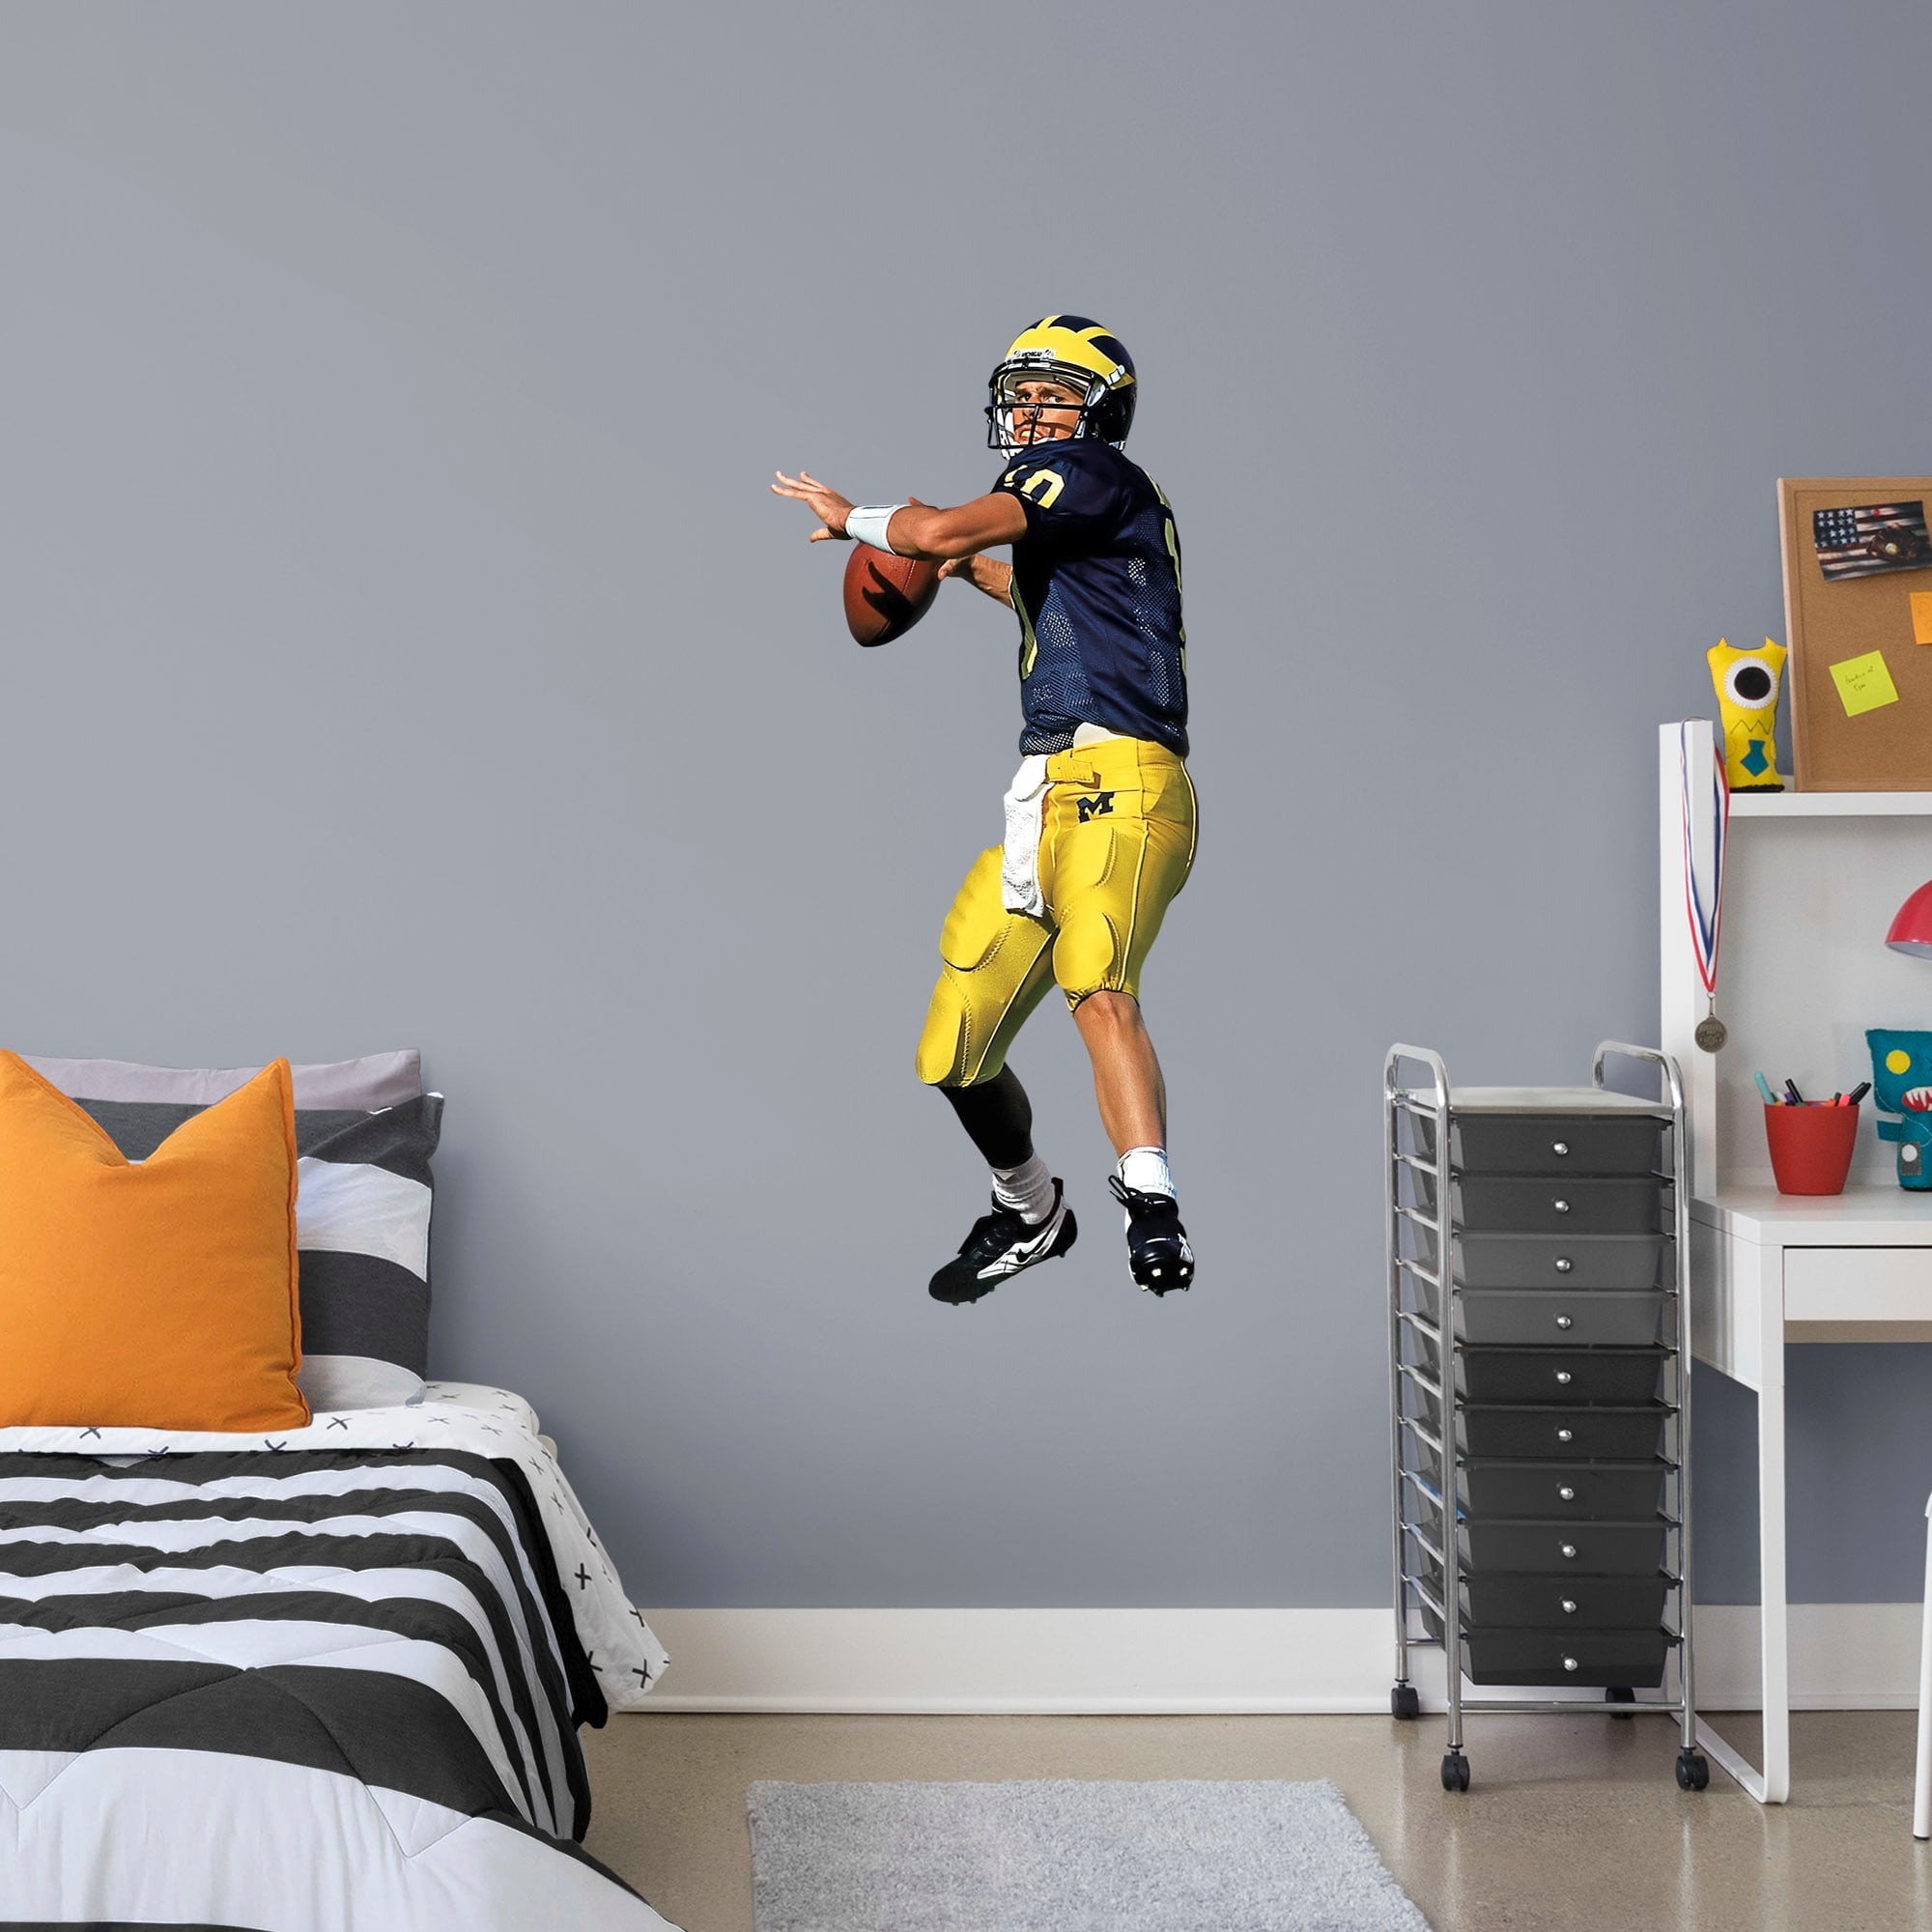 Tom Brady for Michigan Wolverines: Michigan - Officially Licensed Removable Wall Decal Giant Athlete + 2 Decals (22"W x 51"H) by